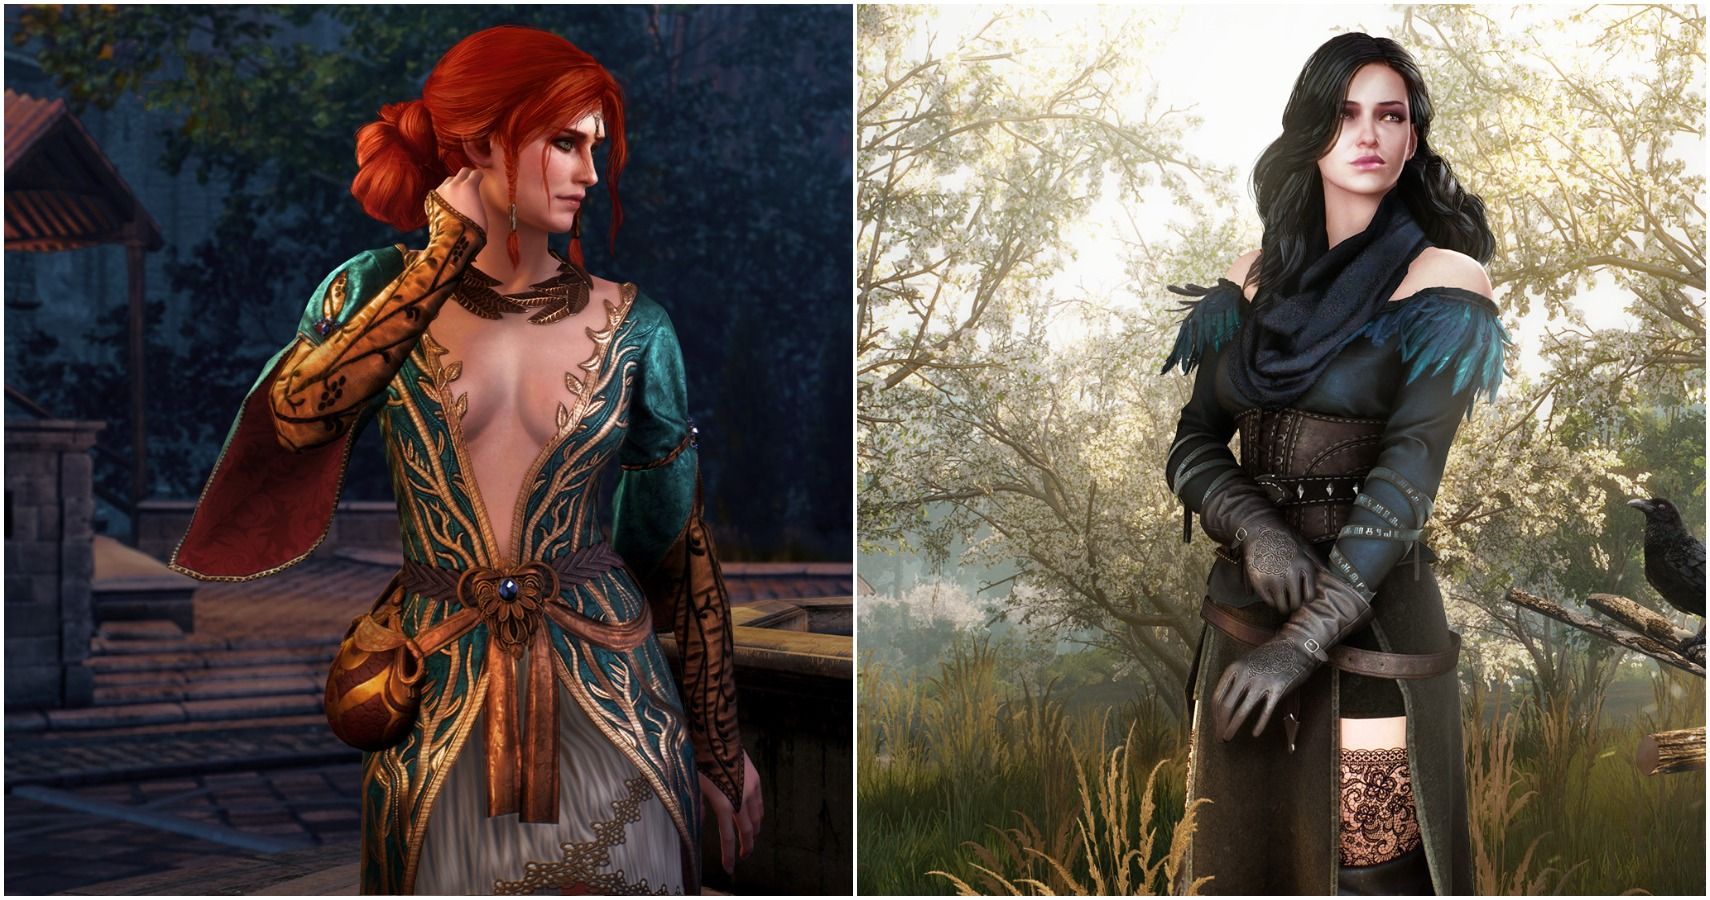 The witcher 3 alternative look for yennefer фото 9